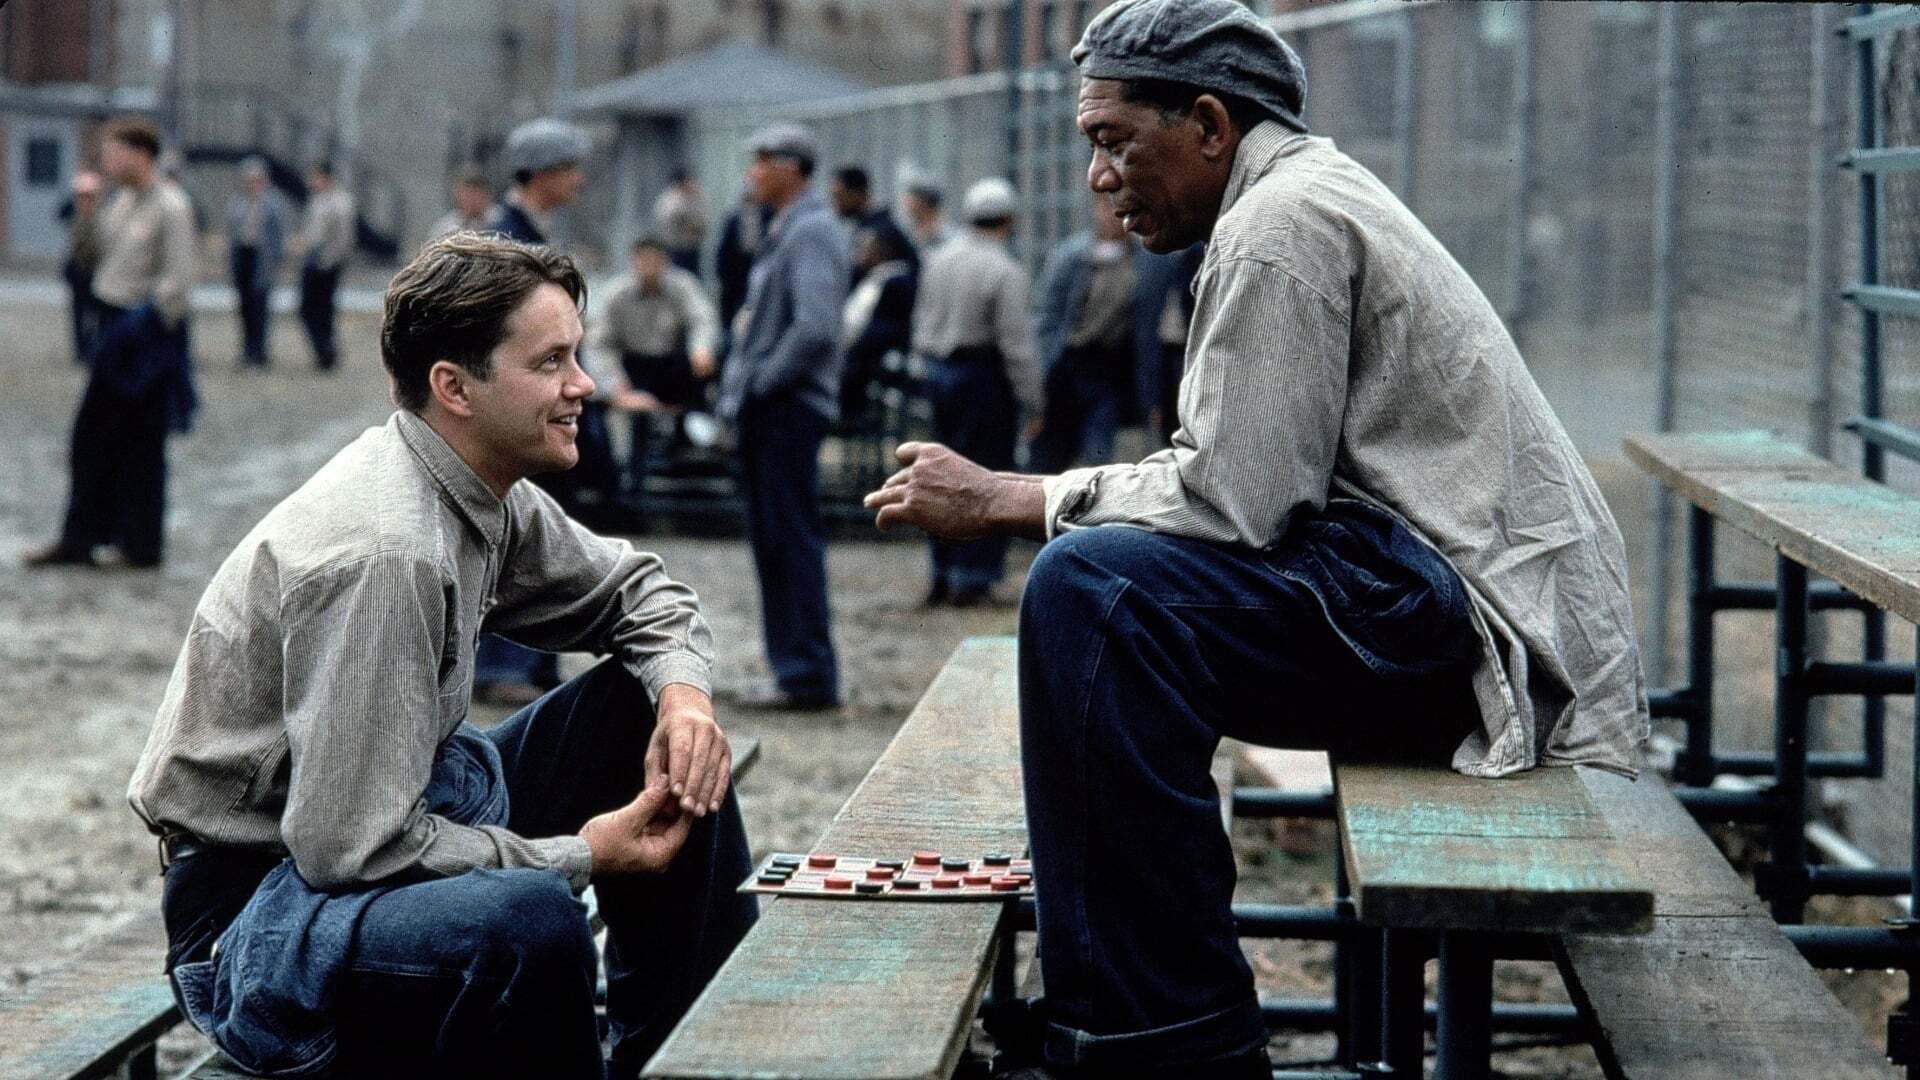 The Best Movie of All Time knocked the cult drama Shawshank Redemption off the top spot on IMDb before its premiere